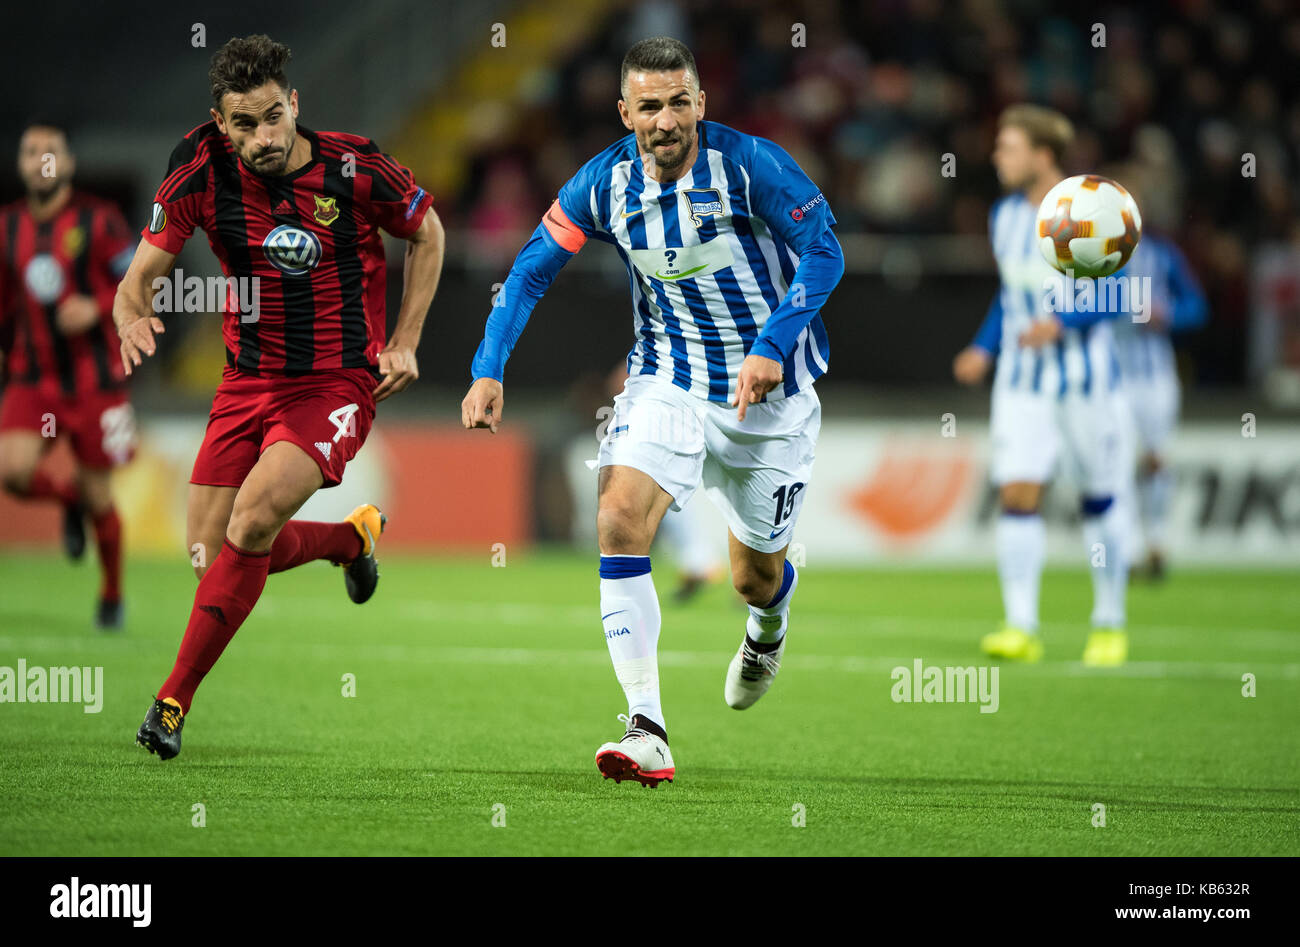 Hertha's Vedad Ibisevic (r) and Oestersund's Sotirios Papagiannopoulus in action during the Europa League match between Ostersunds FK and Hertha BSC at the Jaemtkraft Arena in Ostersund, Sweden, 28 September 2017. Photo: Soeren Stache/dpa Stock Photo